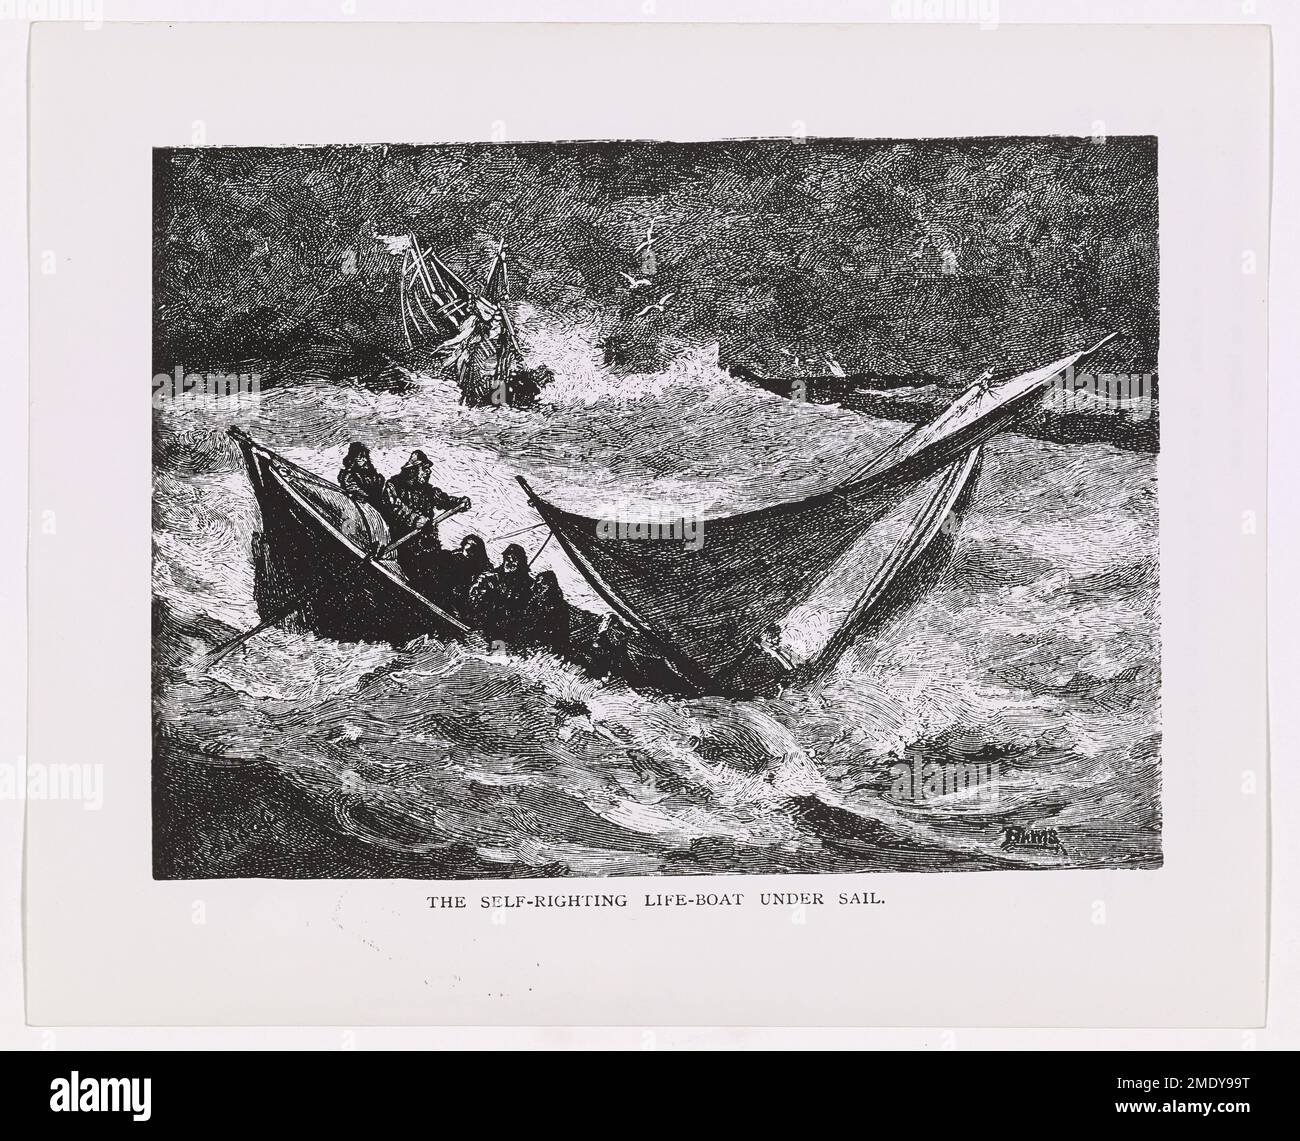 The Self-righting Lifeboat Under Sail. Oldtimer Lifesavers - One of a series of sketches on the former U.S. Lifesaving Services (forerunner of the U.S. Coast Guard), by M. J. Burns c. 1879 and c. 1900, published in the Old Harper's Weeklies. In some of the sketches there appear other initials in addition to Burns' name. Sketch from Old Harper's Weekly - on U.S. Lifesaving Service. Stock Photo